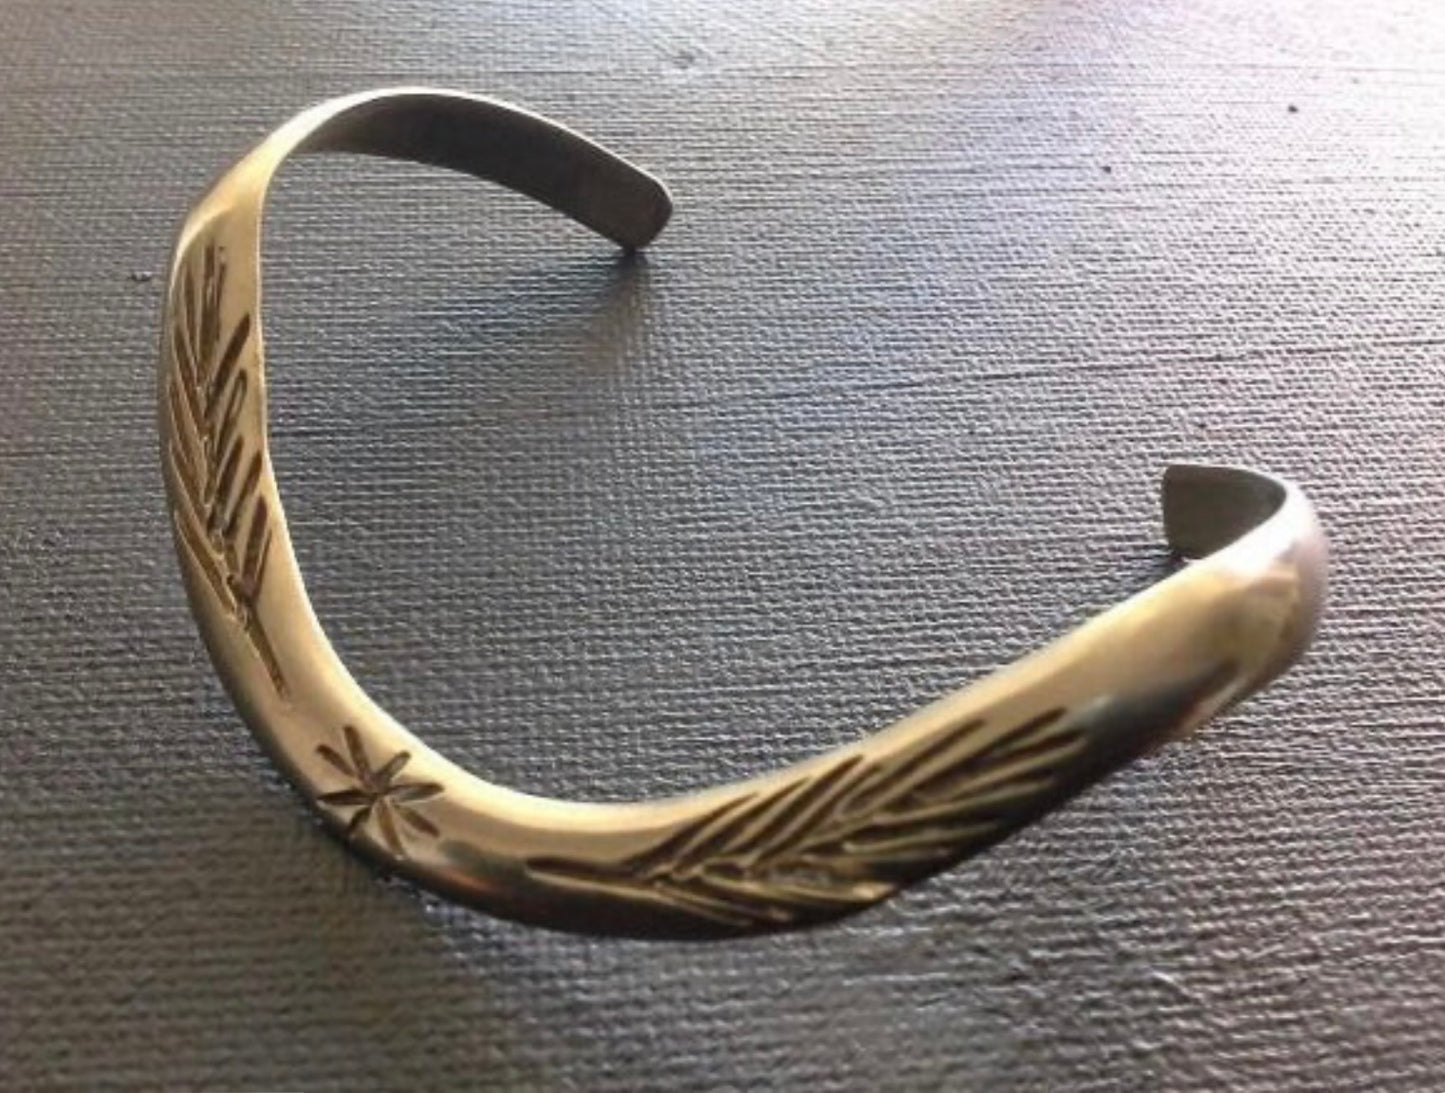 VINTAGE NAVAJO FEATHER TRIBAL WAVE CUFF BANGLE BRACELET COIN SILVER